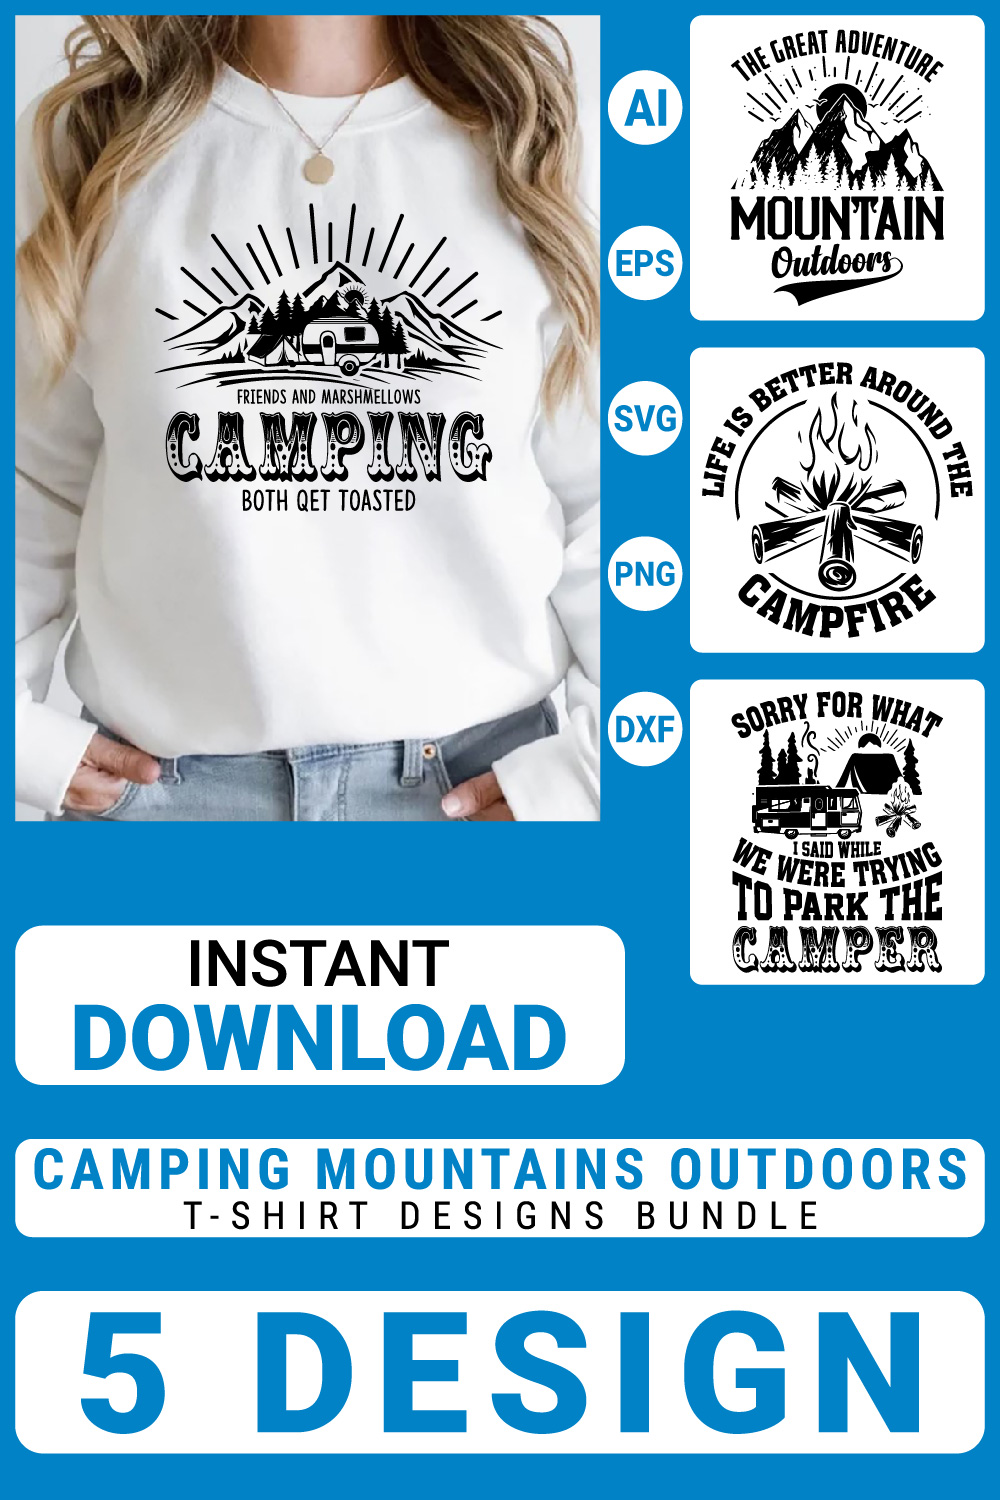 Camping Adventures mountains Outdoors Vector illustration t-shirt design Graphic T-Shirt Design pinterest preview image.